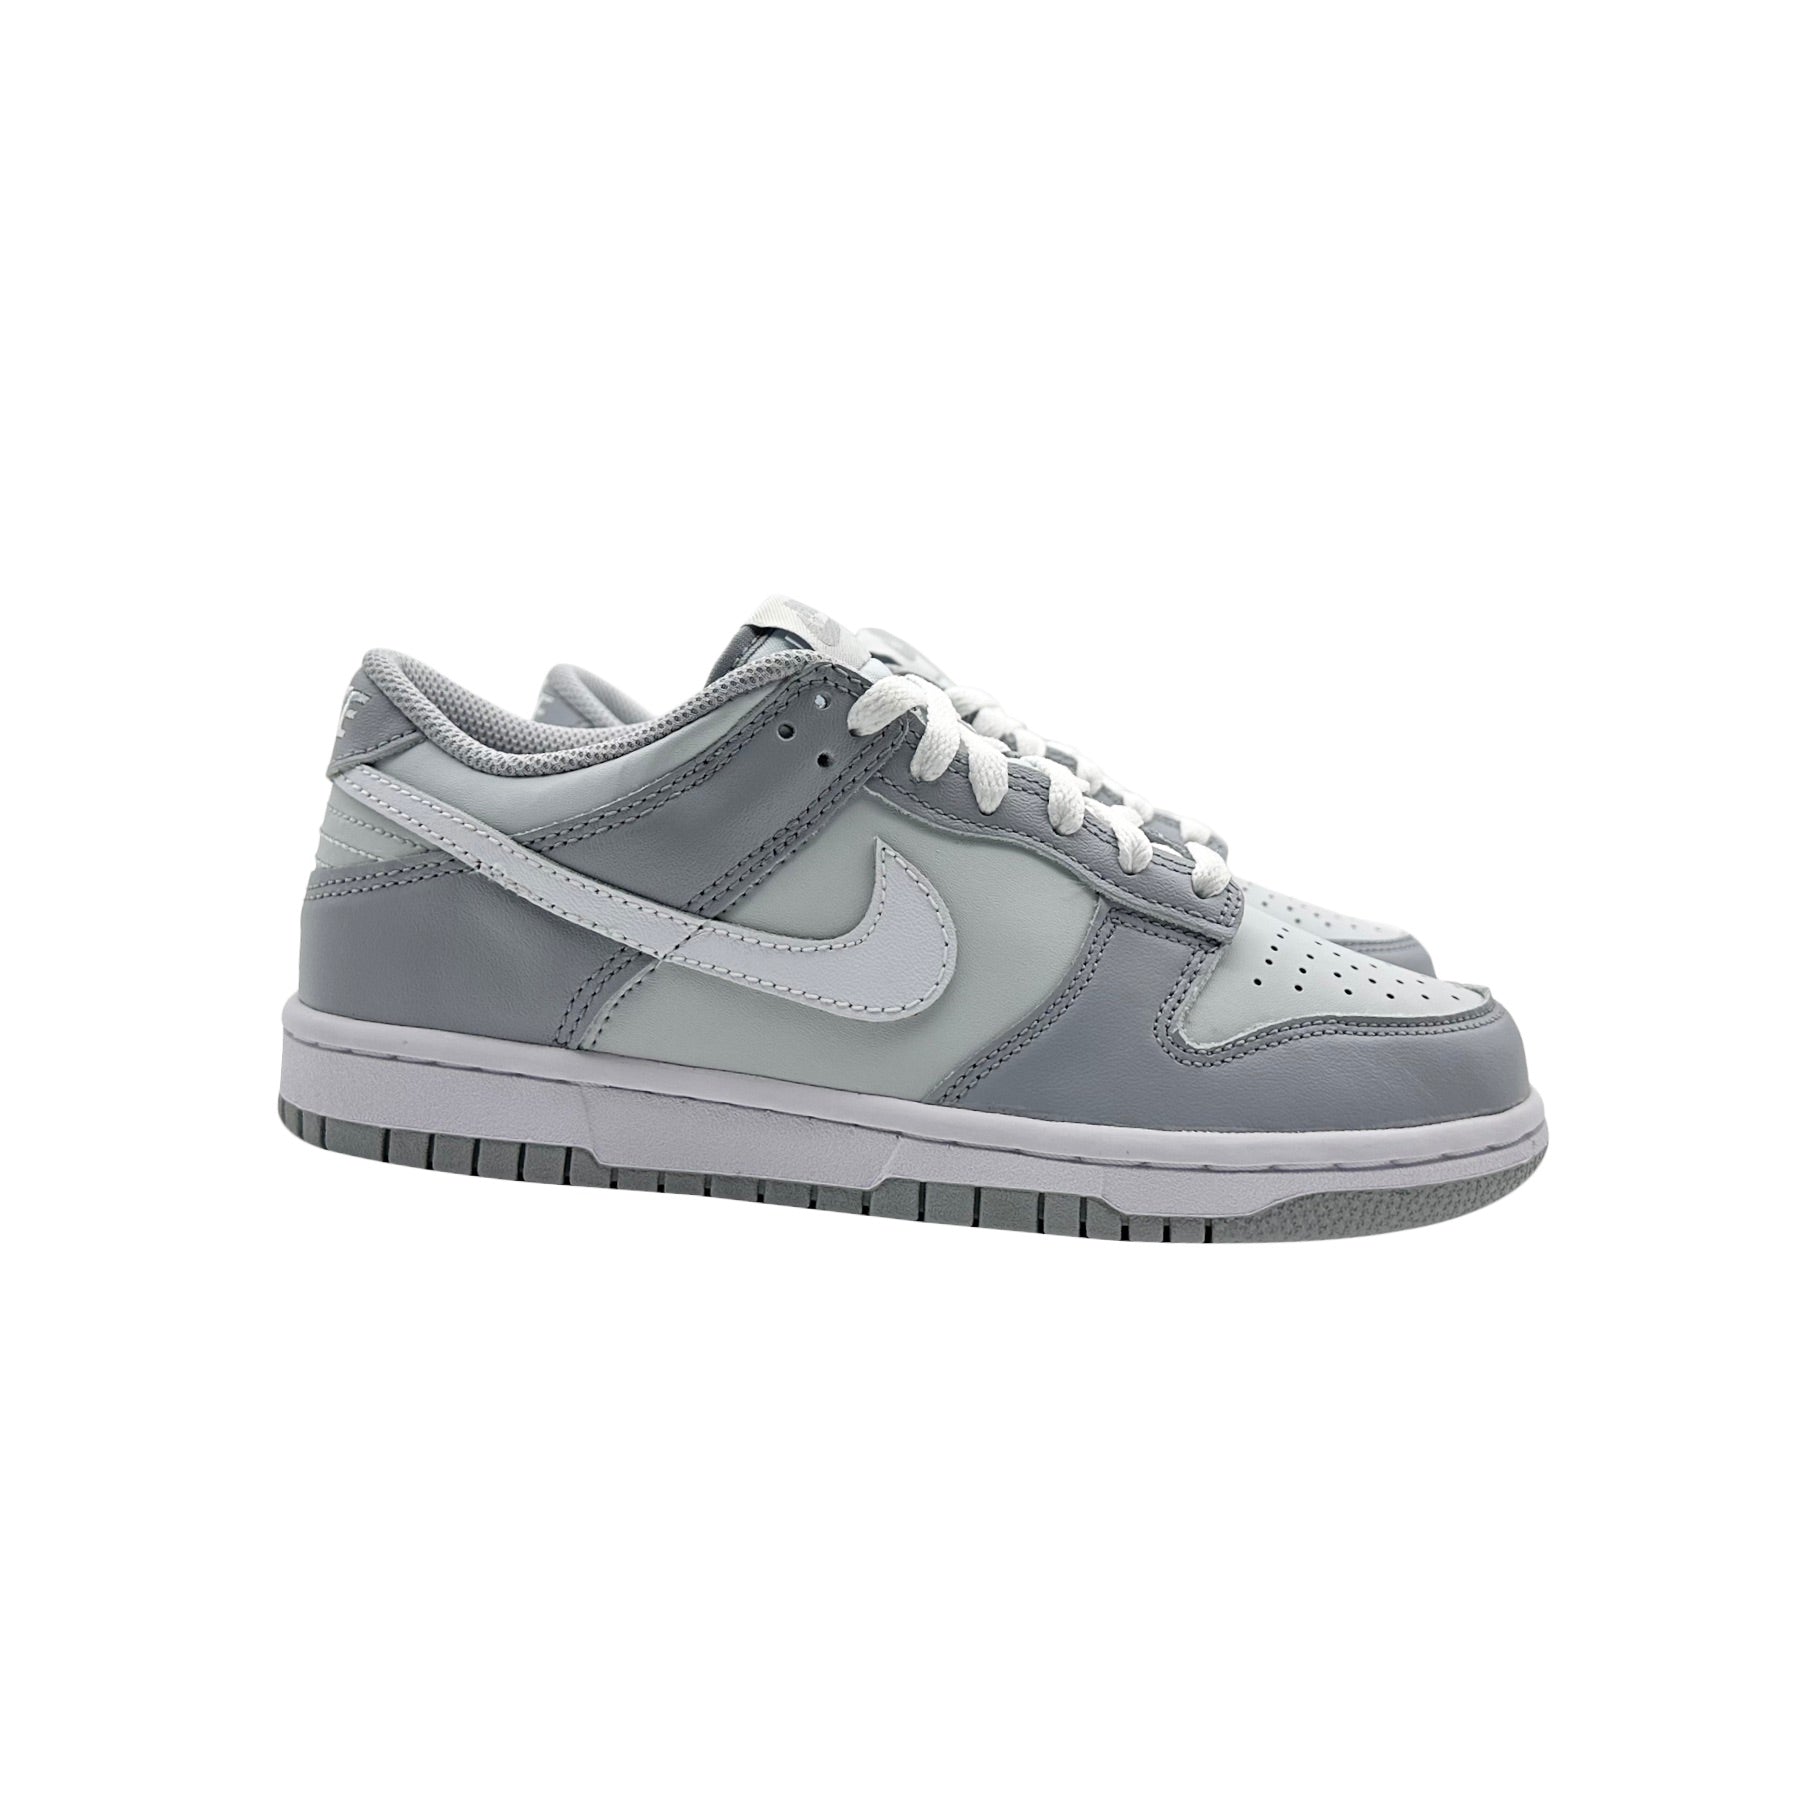 Nike Dunk Low Two Tone Grey GS - DH9765 - 001 - Coziness